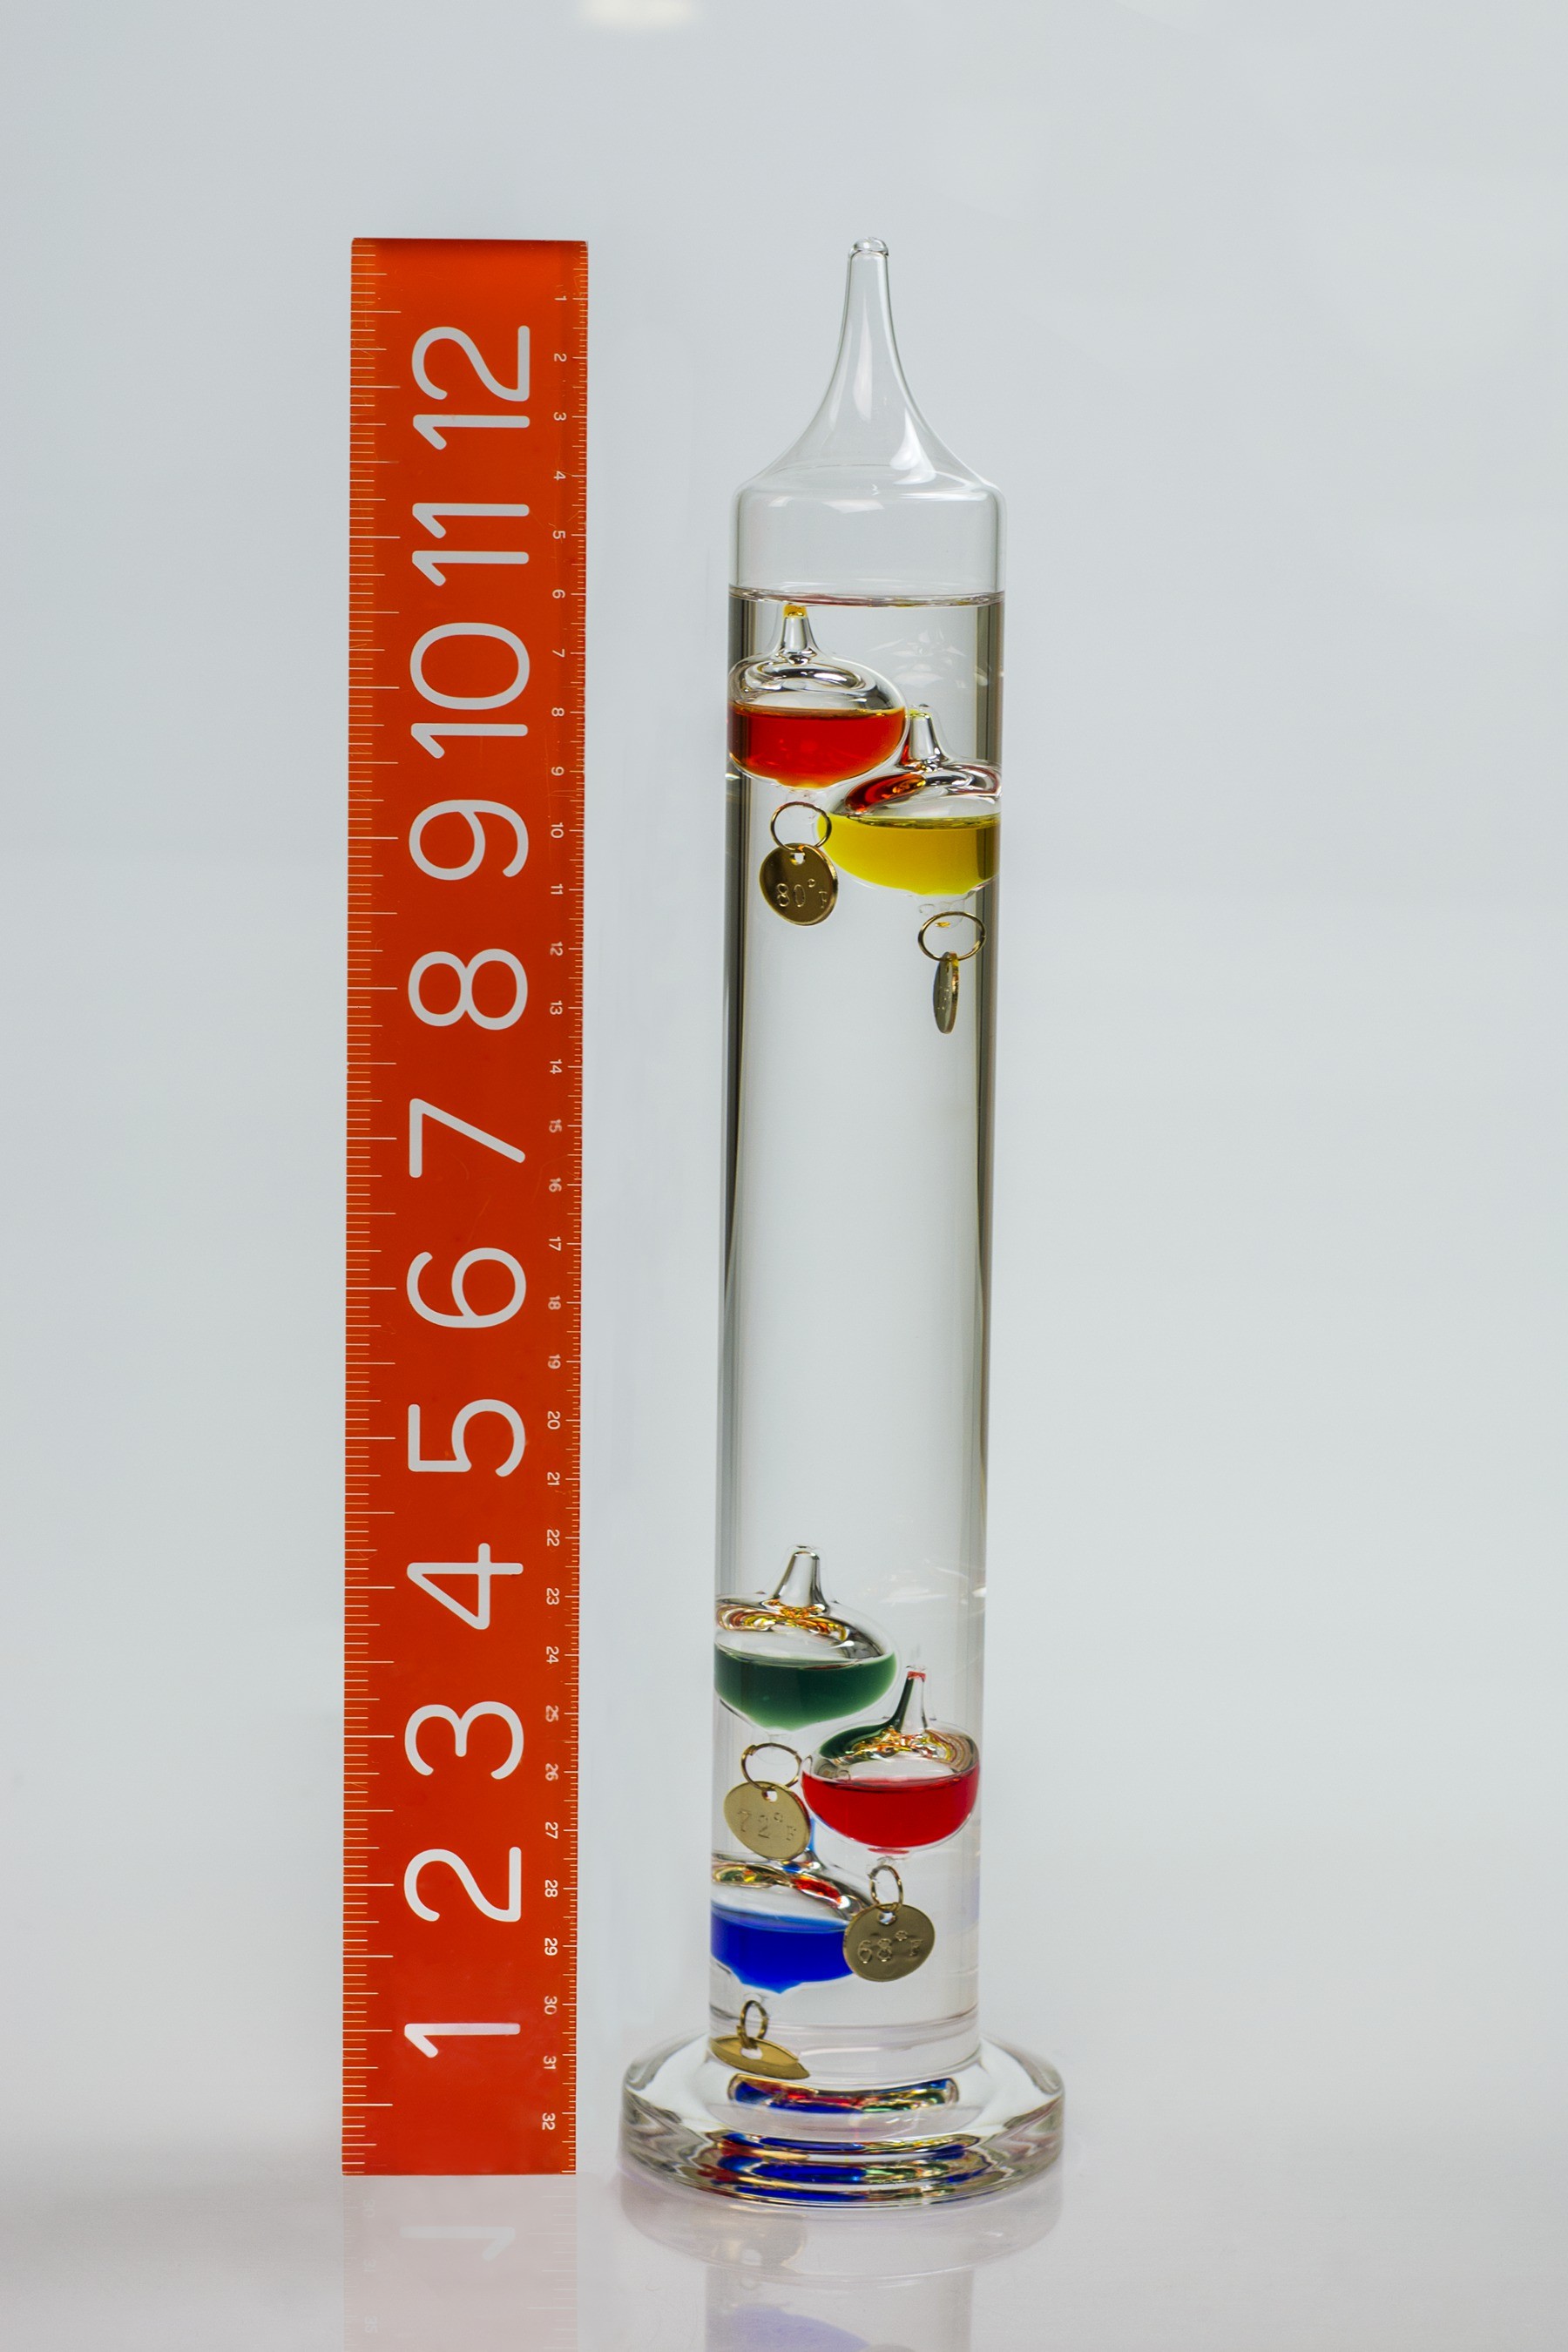 SP Bel-Art, H-B DURAC Galileo Thermometer; 18 to 26C (64 to 80F), 5 Spheres, 13 in.